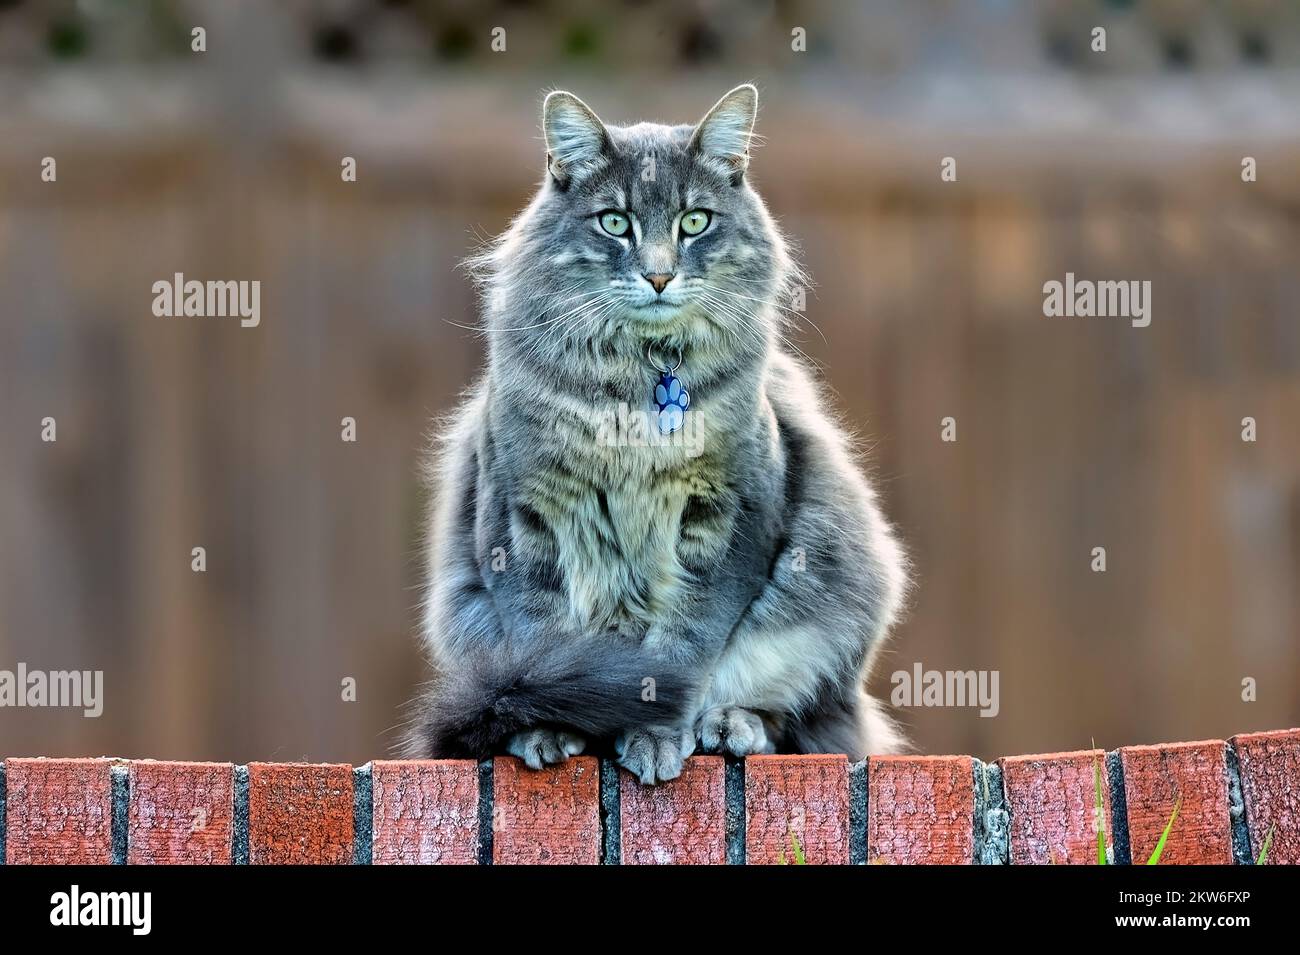 A long haired domestic house cat (Felis catus) sitting on a brick wall in her backyard domain. Stock Photo